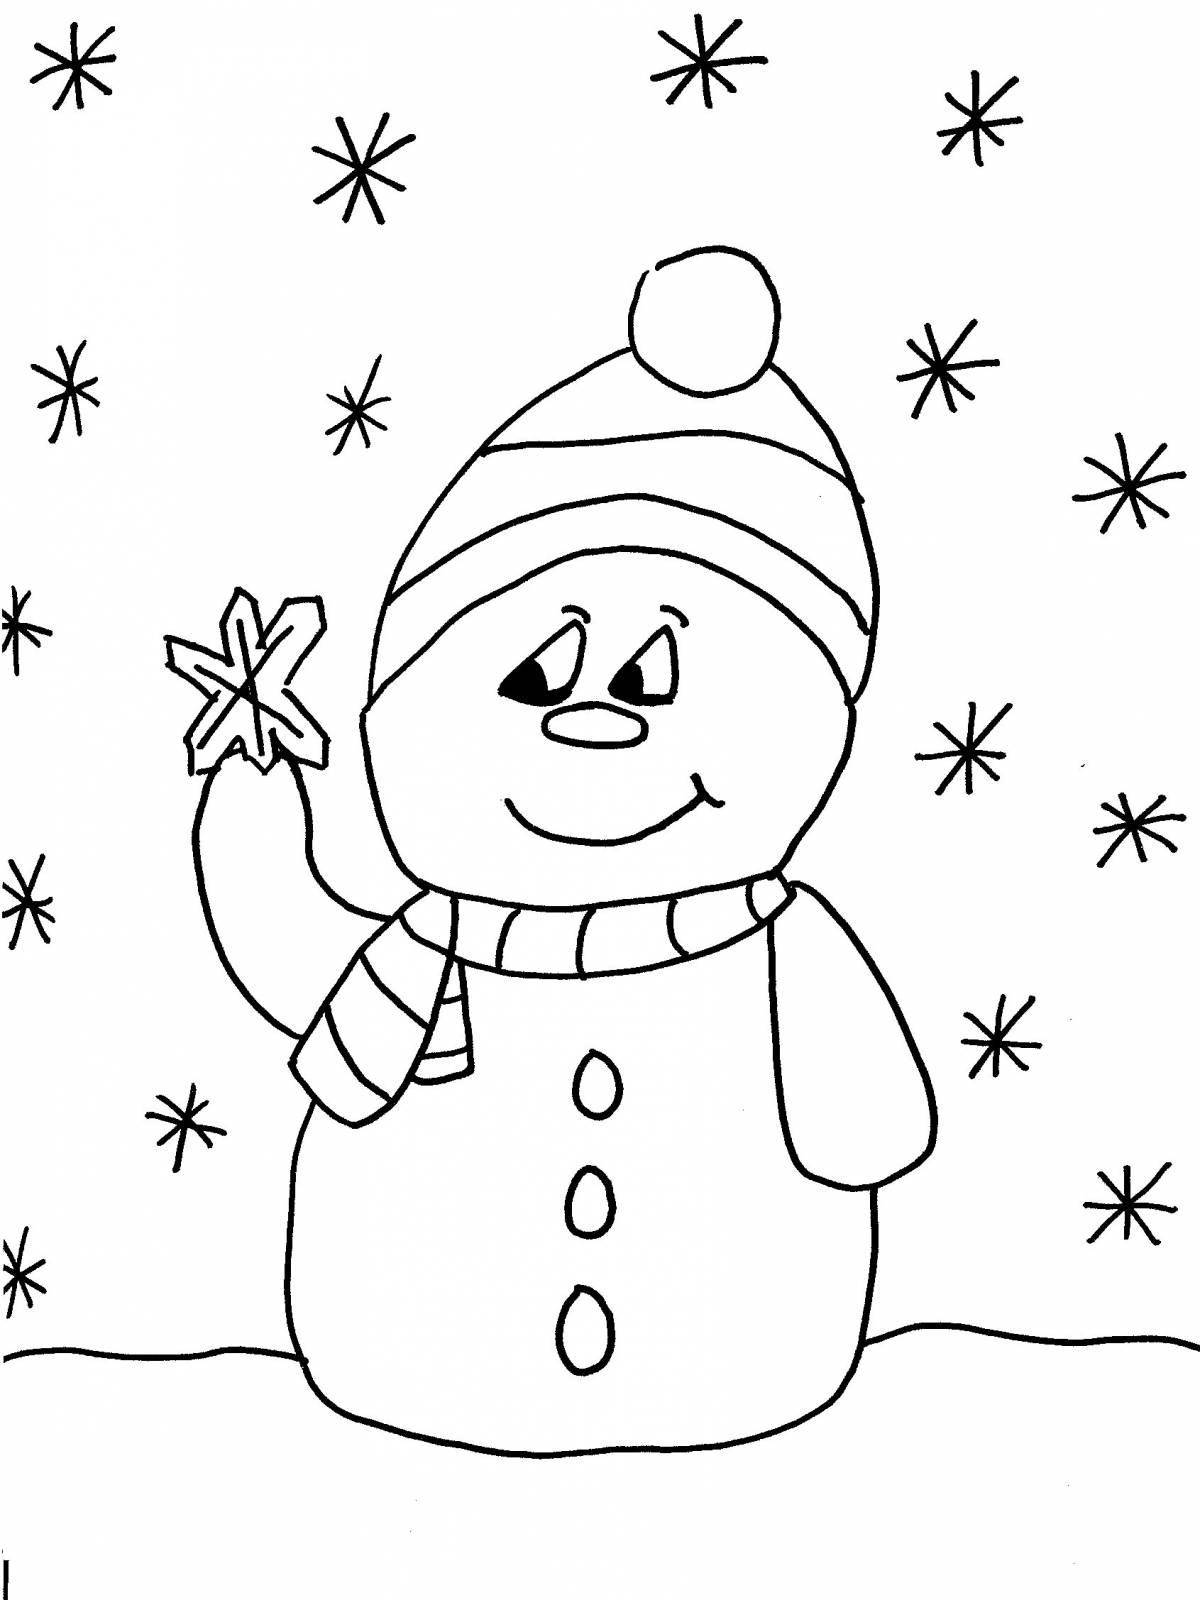 Wonderful coloring page 3 4 years winter